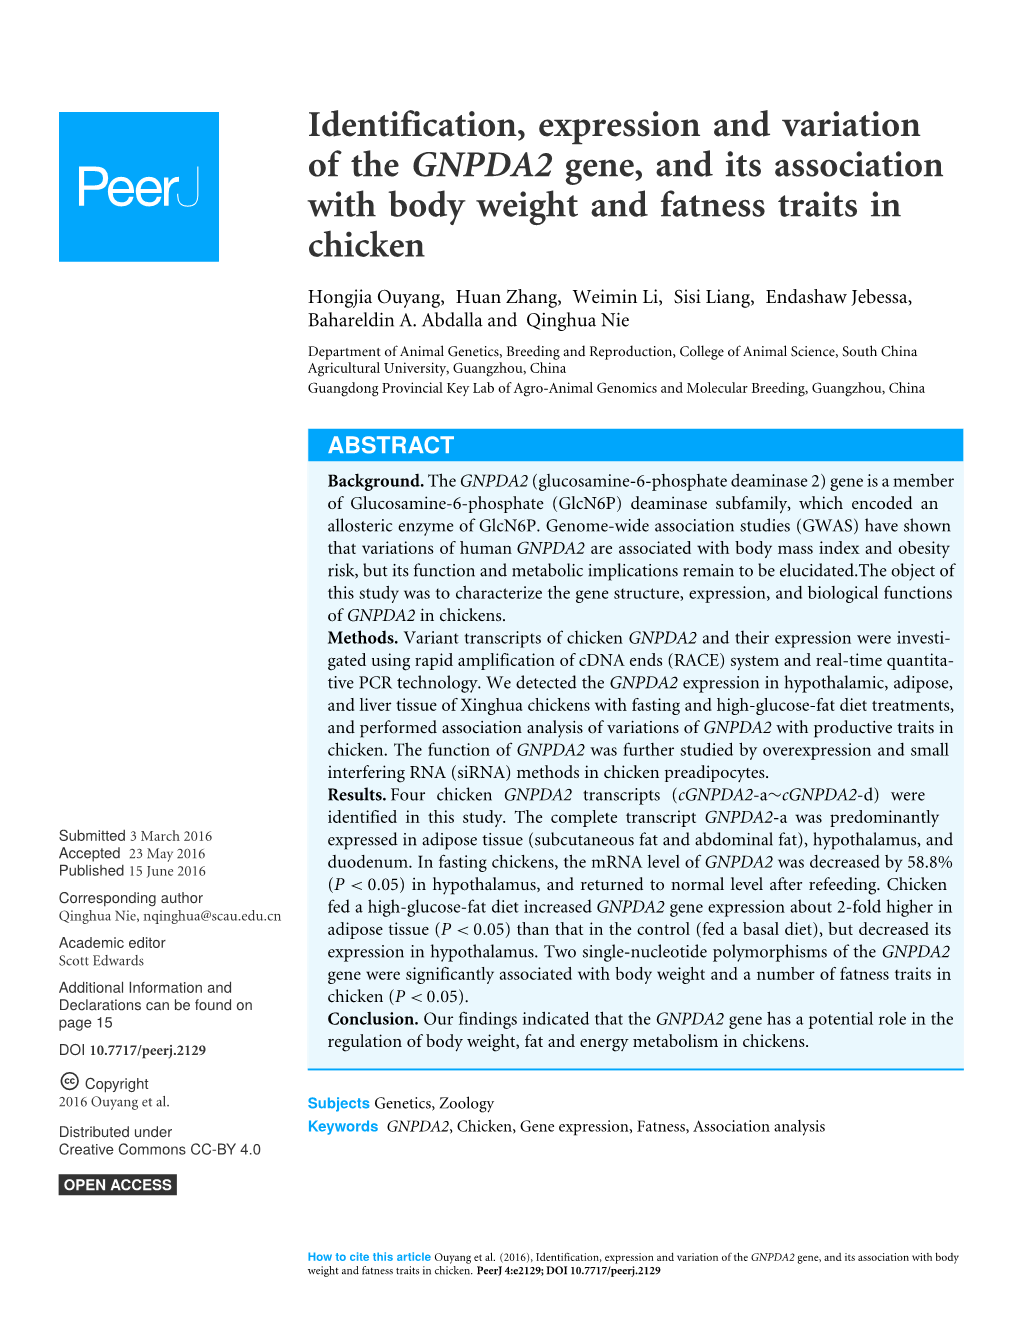 Identification, Expression and Variation of the GNPDA2 Gene, and Its Association with Body Weight and Fatness Traits in Chicken